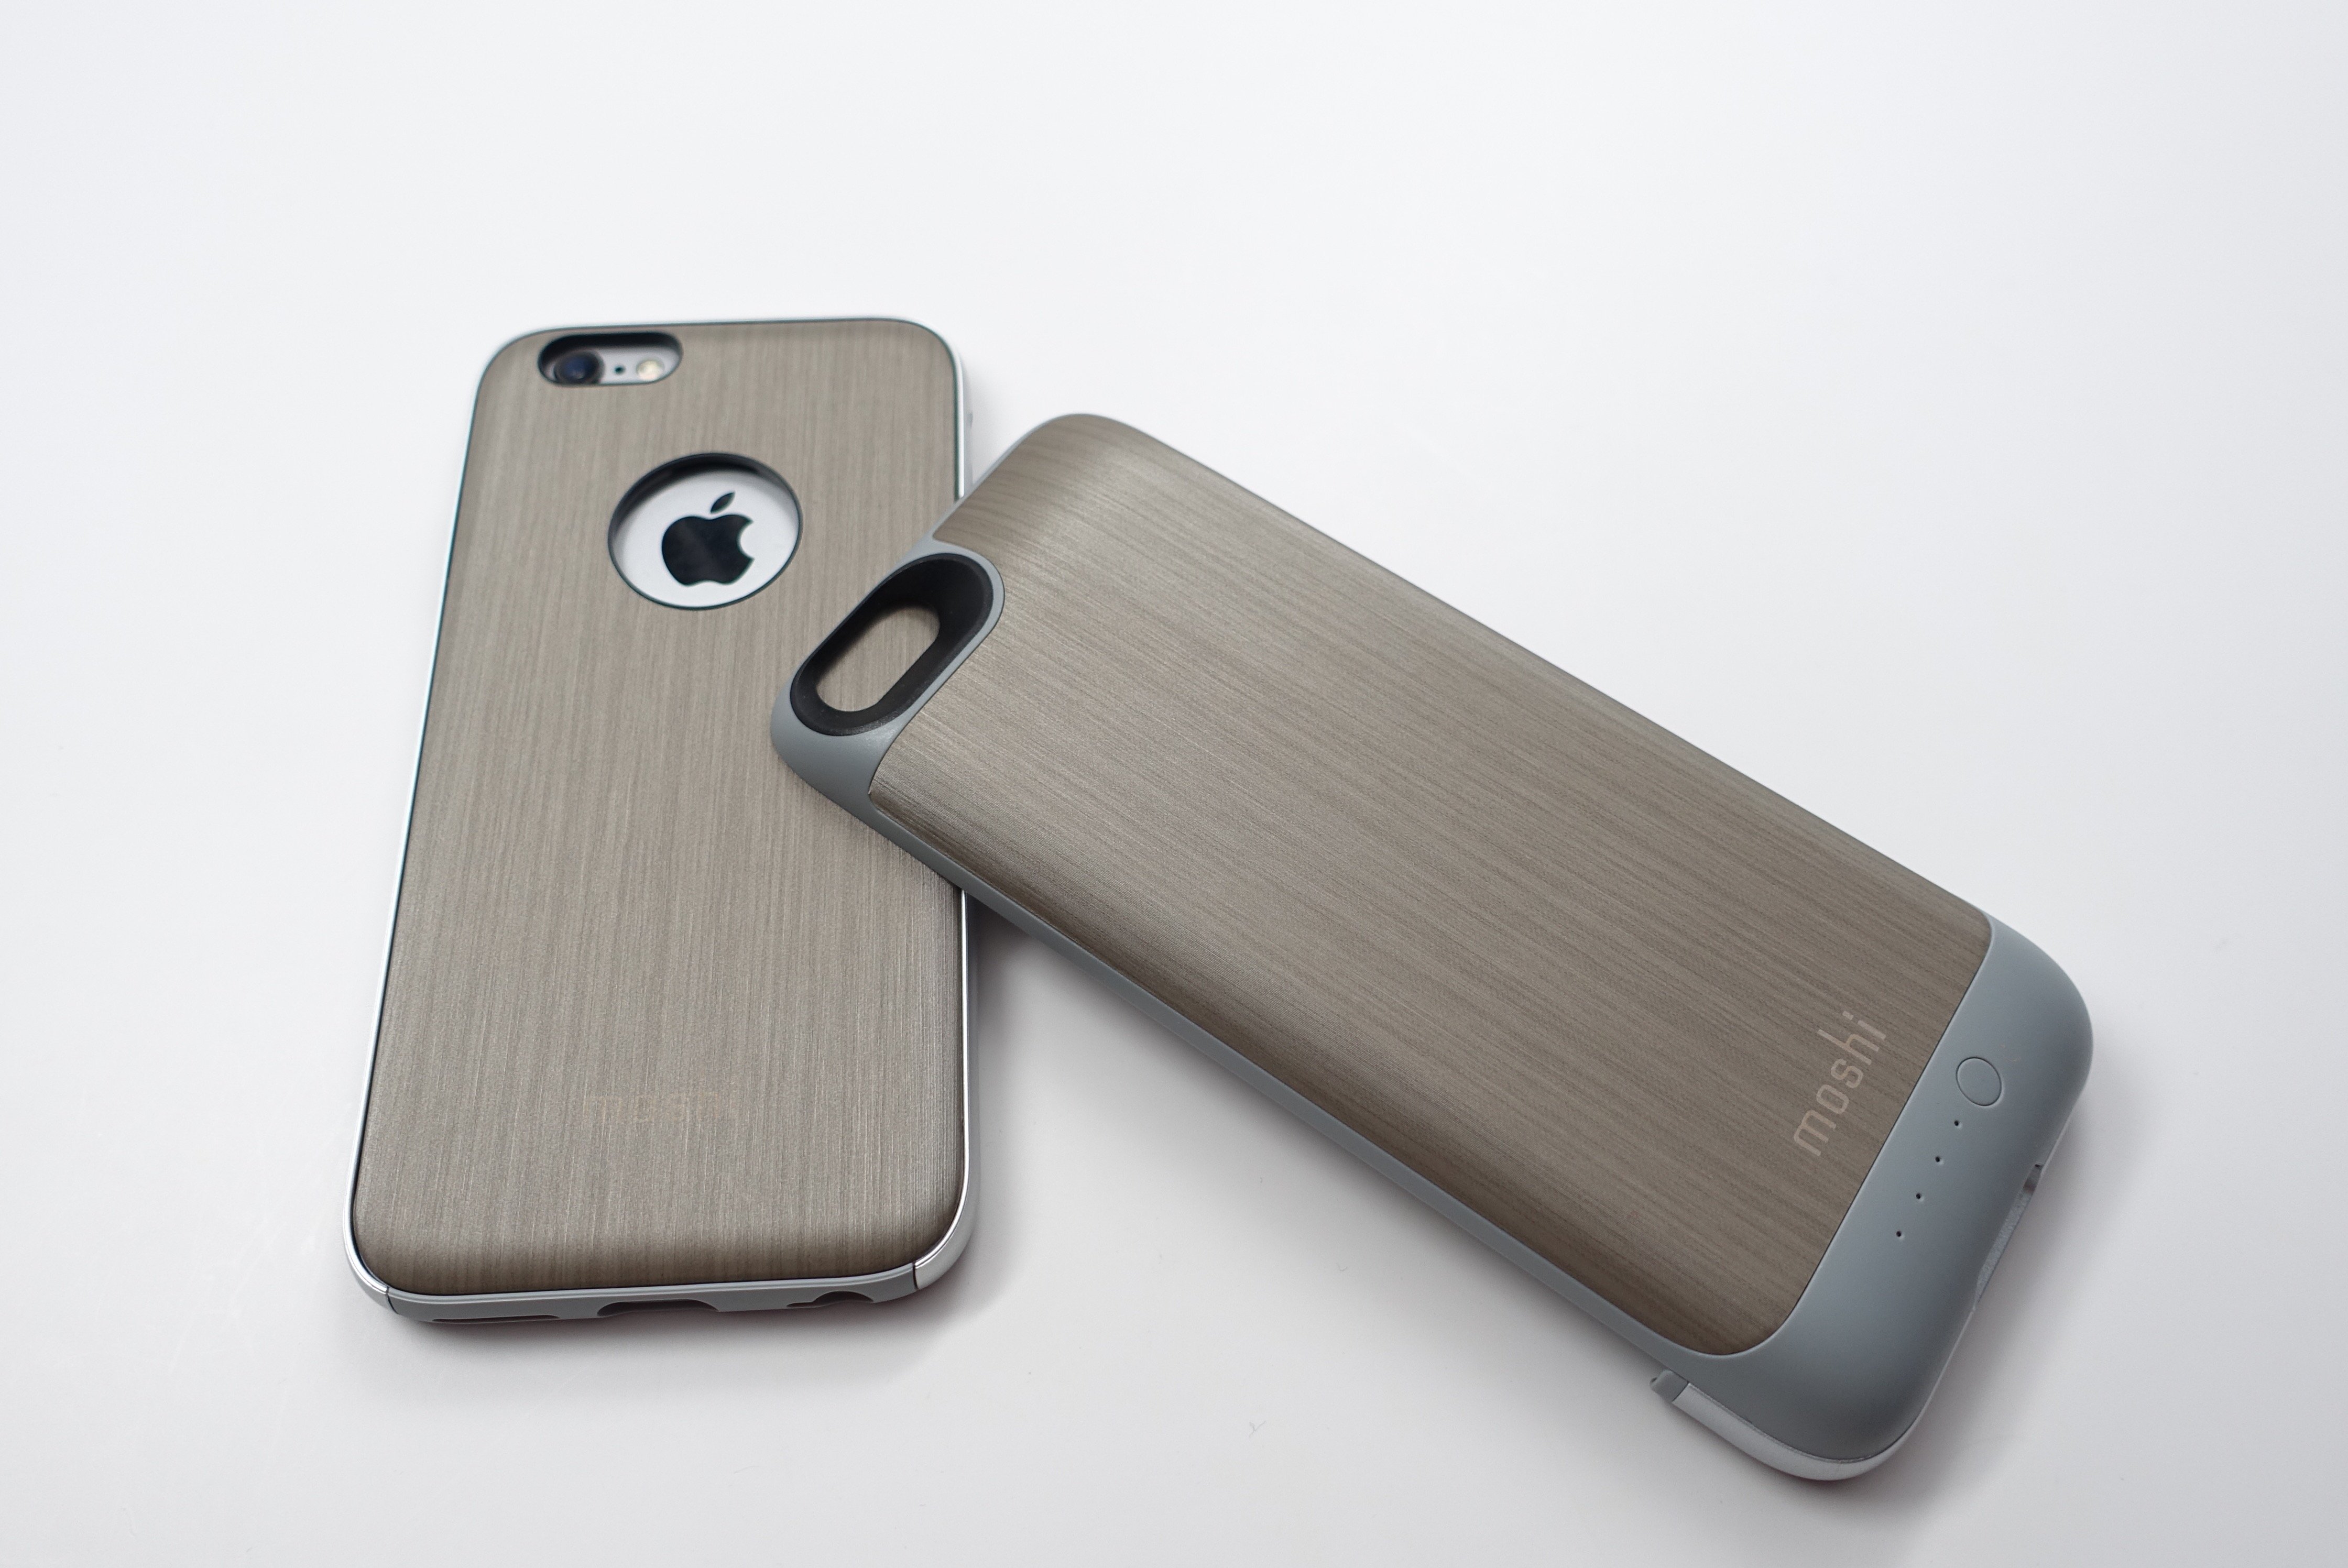 The Moshi iGlaze Ion iPhone 6s battery case looks great and delivers power when you need it.